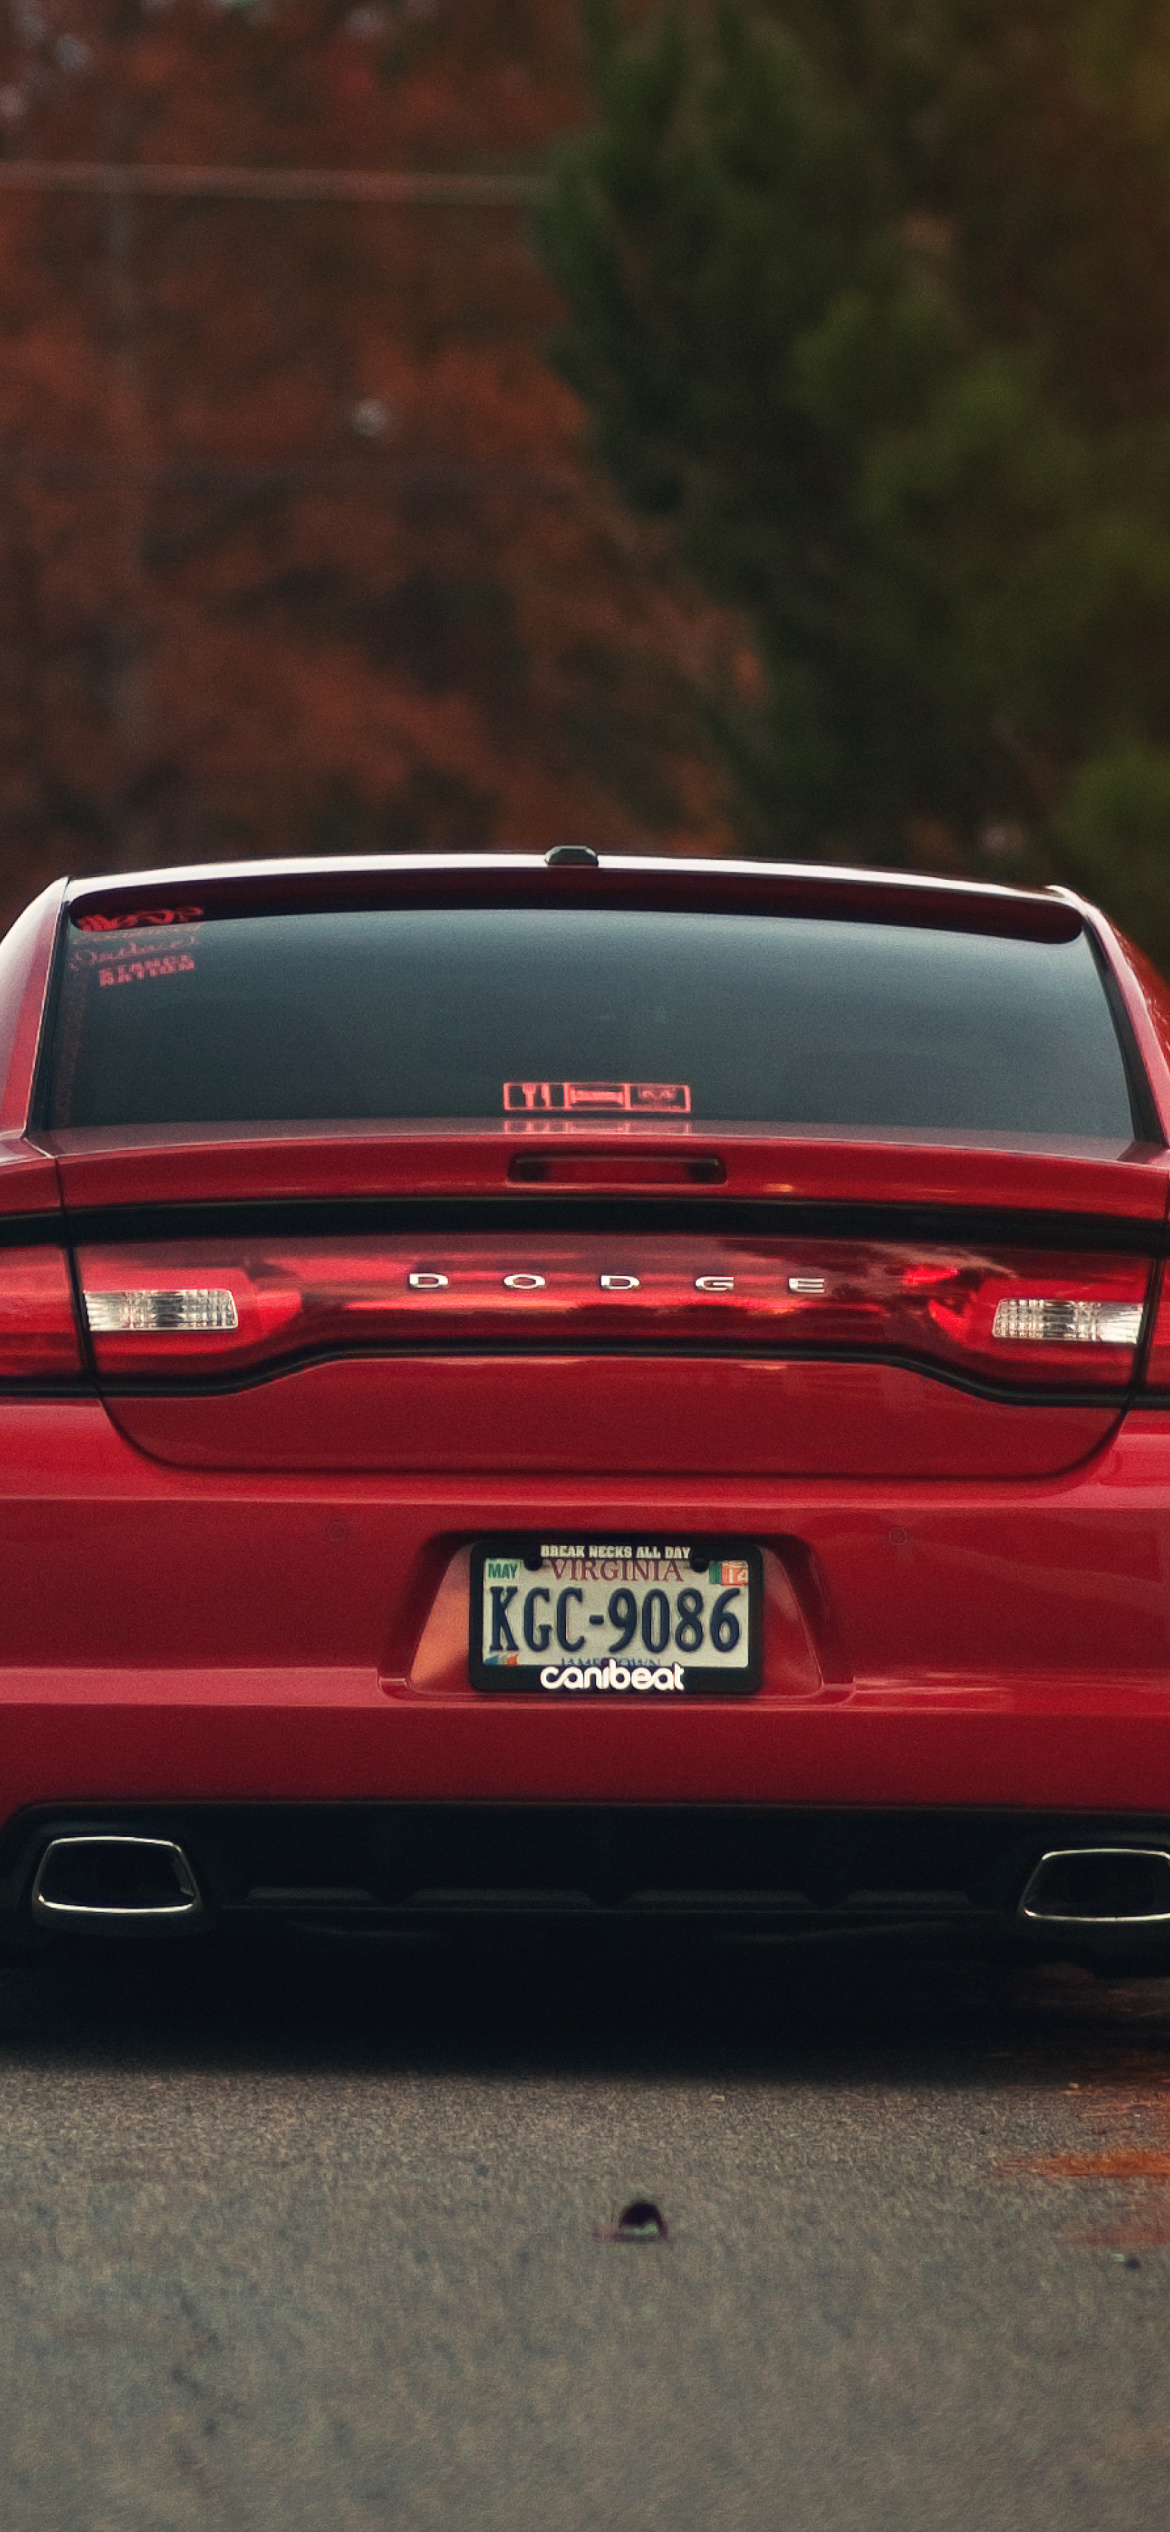 Dodge Charger RT Wallpaper ID50